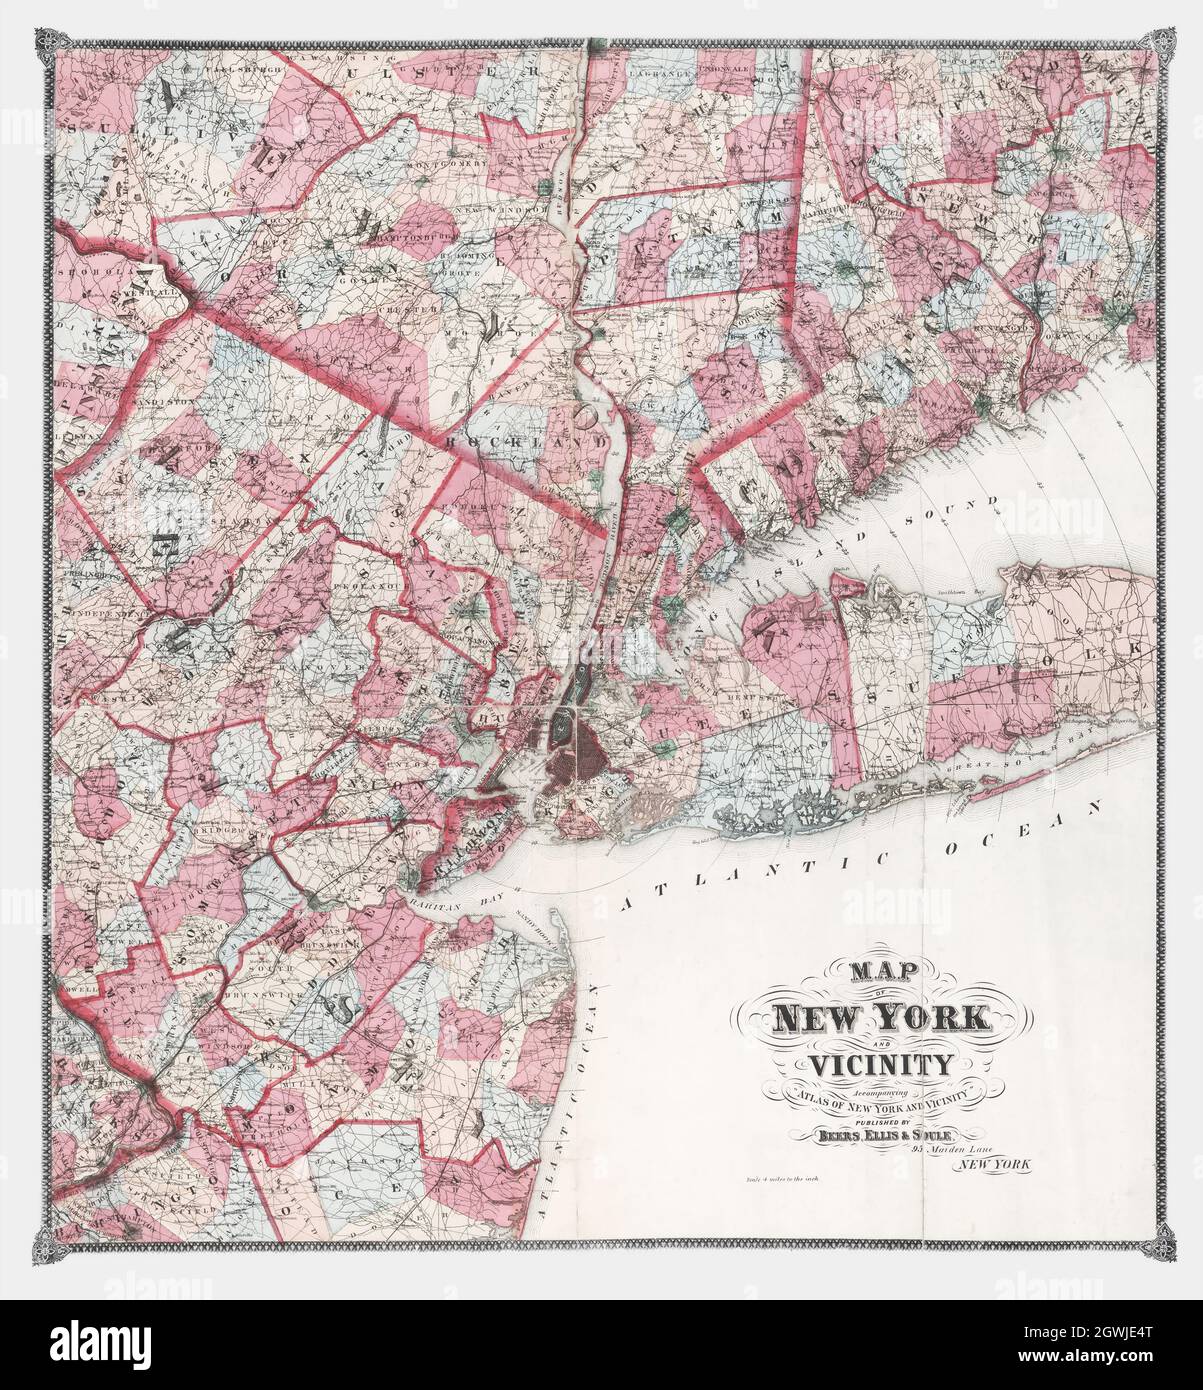 Map of New York and vicinity accompanying 'Atlas of New York and vicinity' published by Beers, Ellis & Soule, 95 Maiden Lane, New York. (1868) Stock Photo